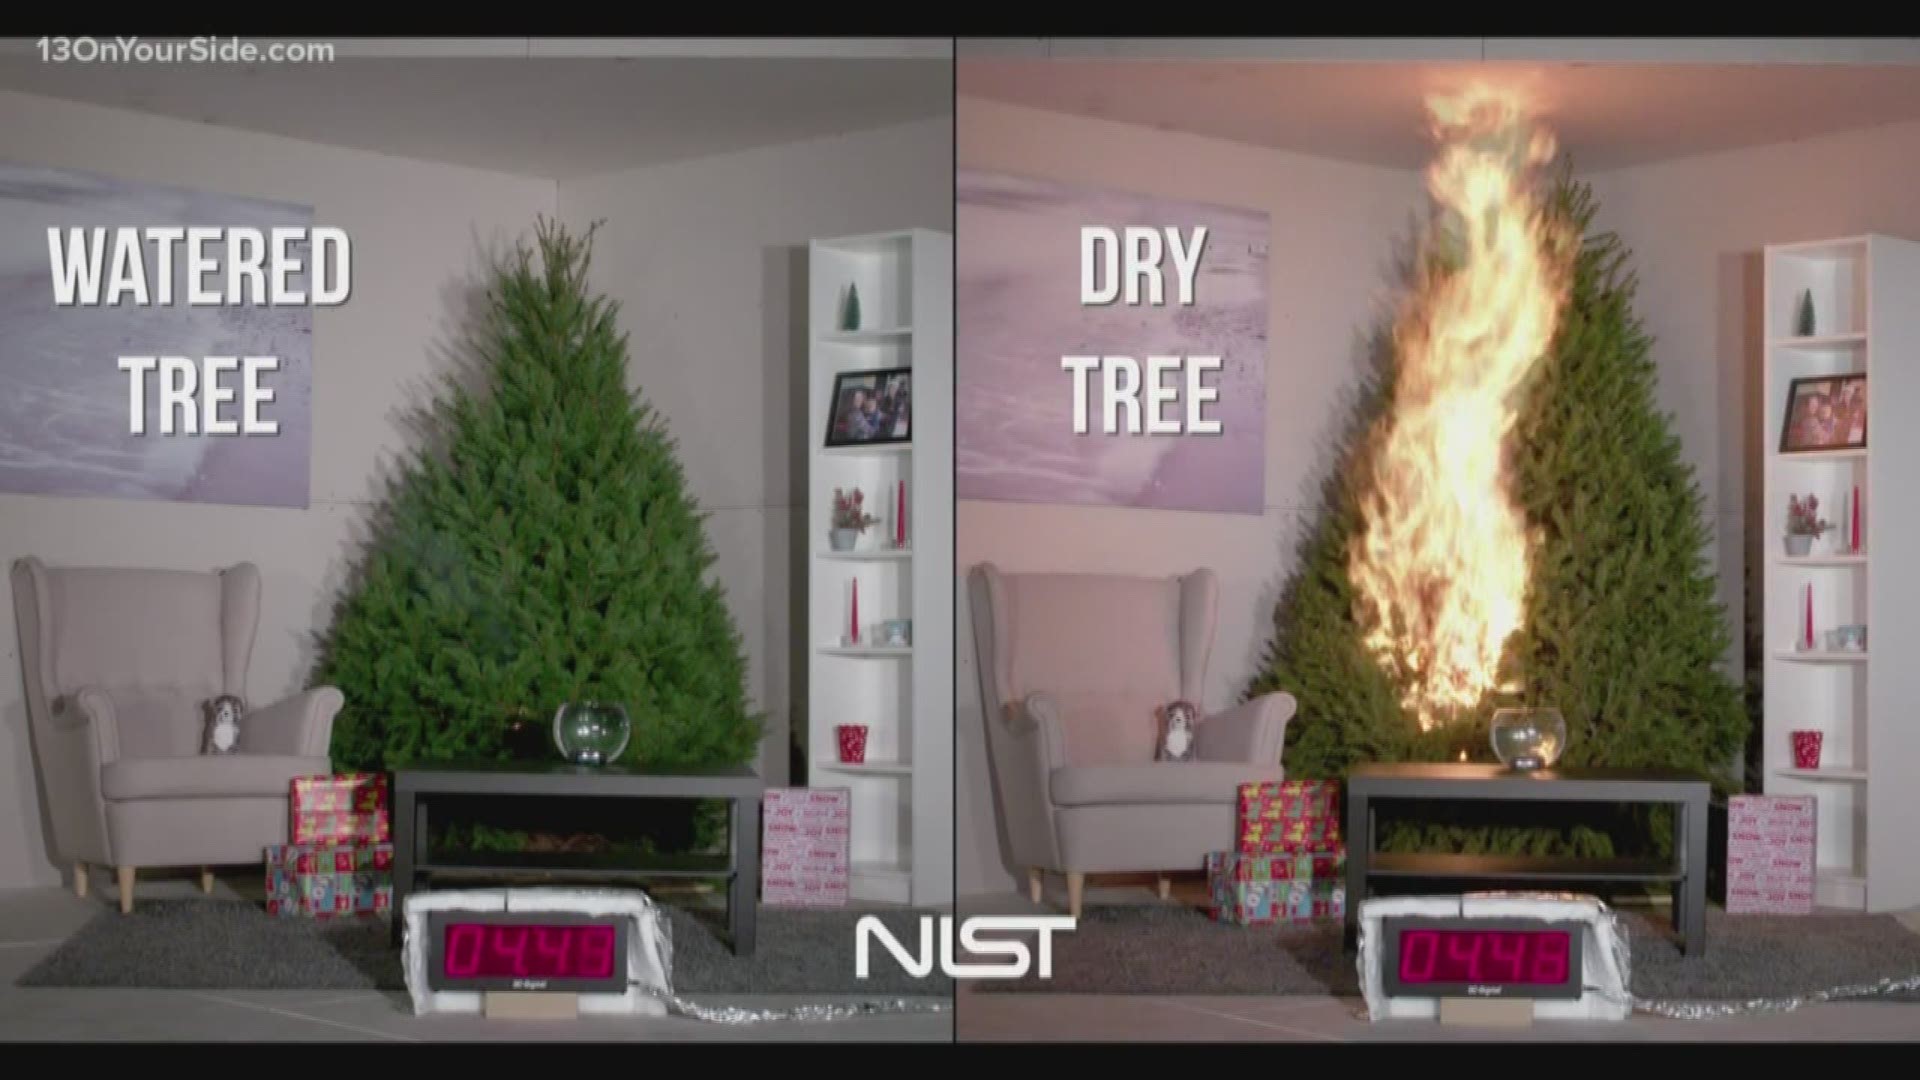 It's a forgotten danger during the holiday season, but Christmas tree fires happen in roughly 200 homes every year.